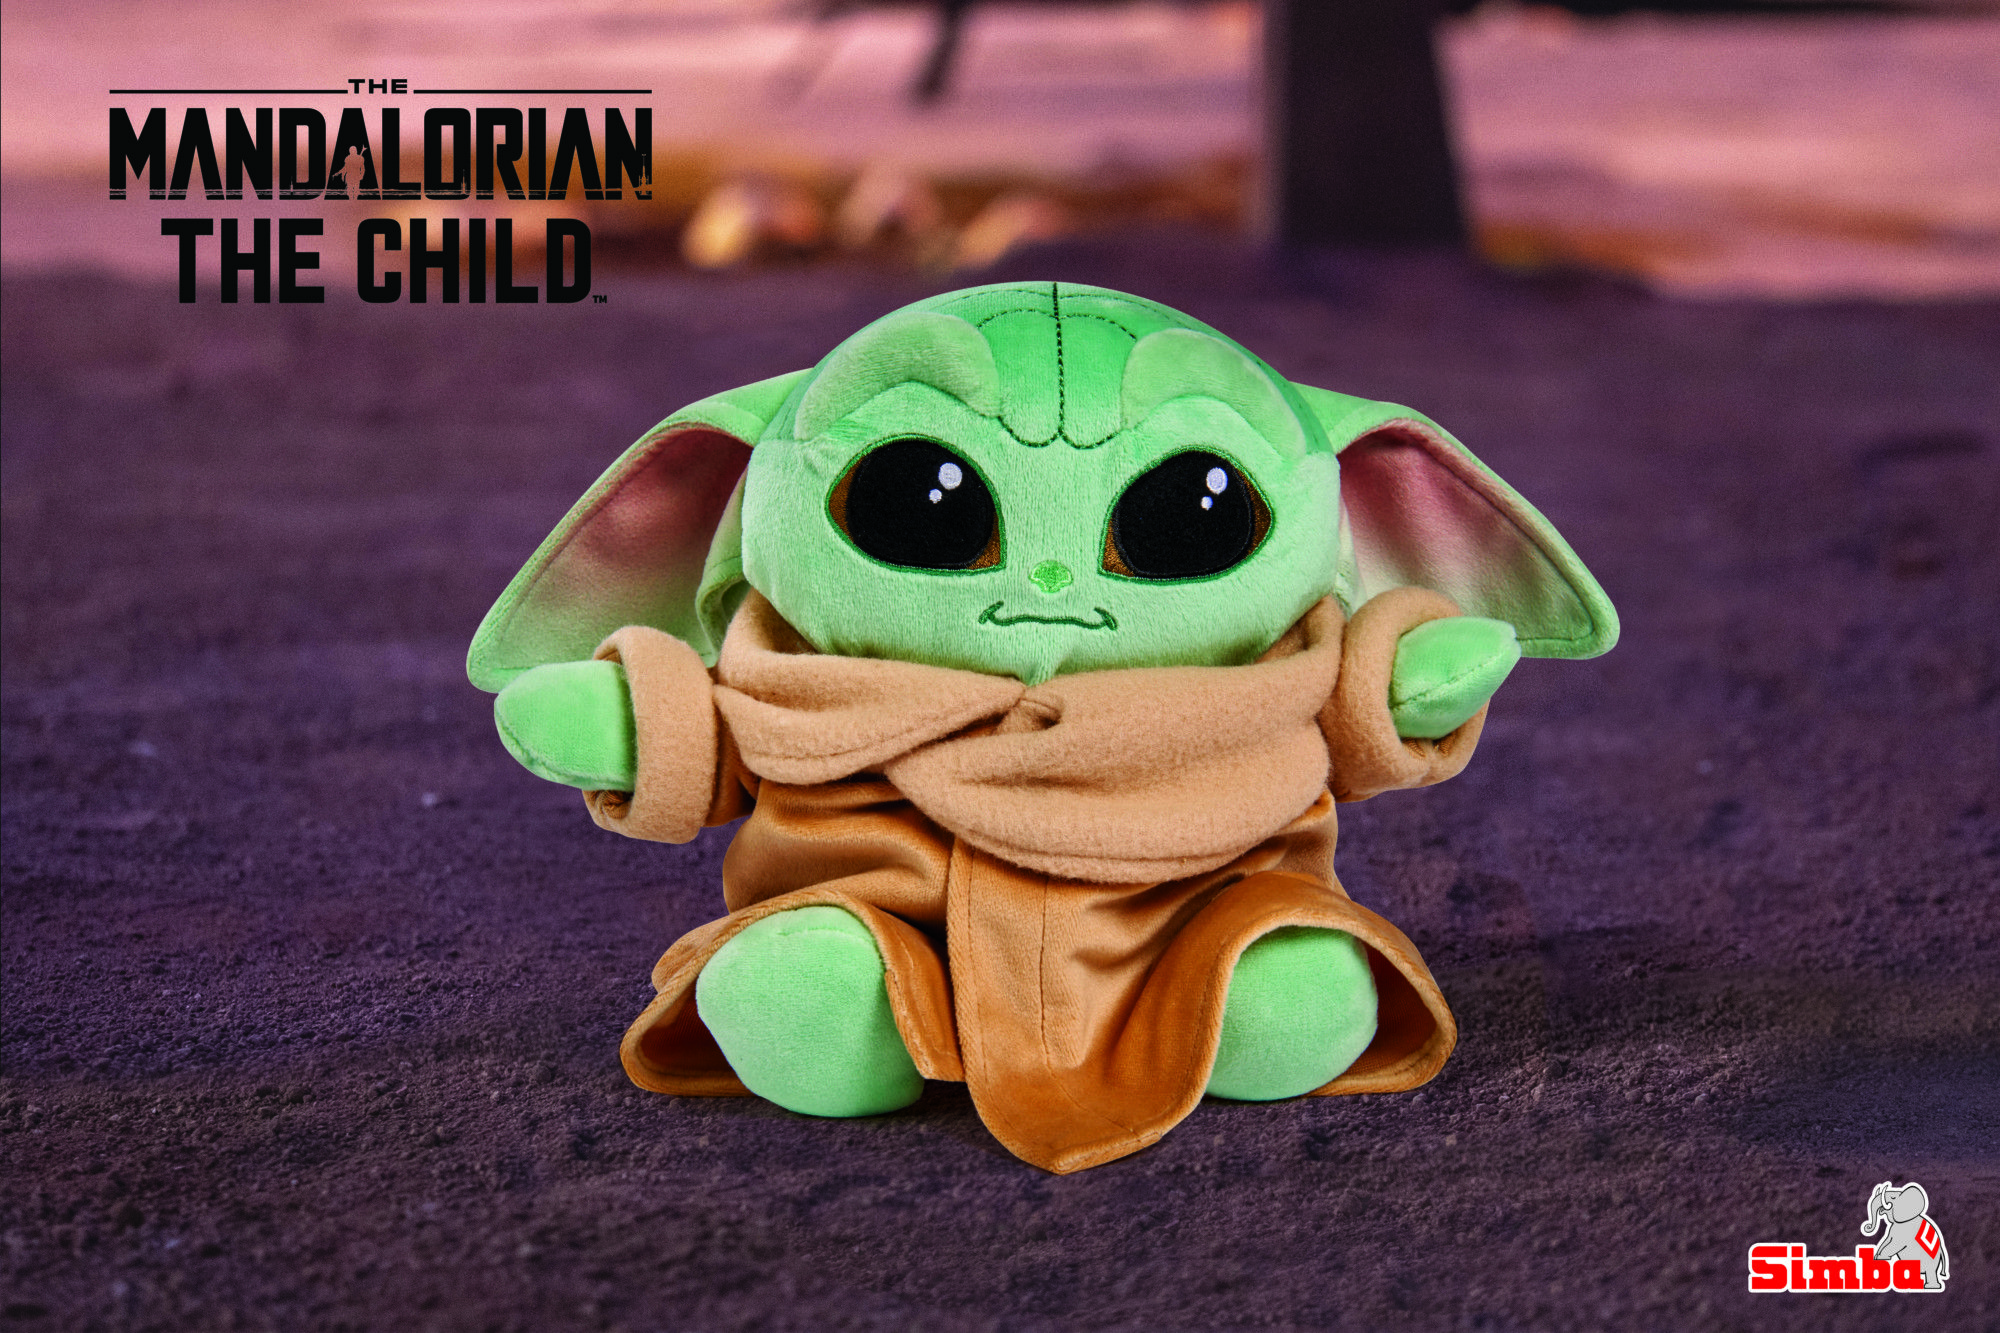 The Child joins Siso Toys' Star Wars plush World Magazine. The business magazine with a passion for toysToy World Magazine. The business magazine with a passion for toys